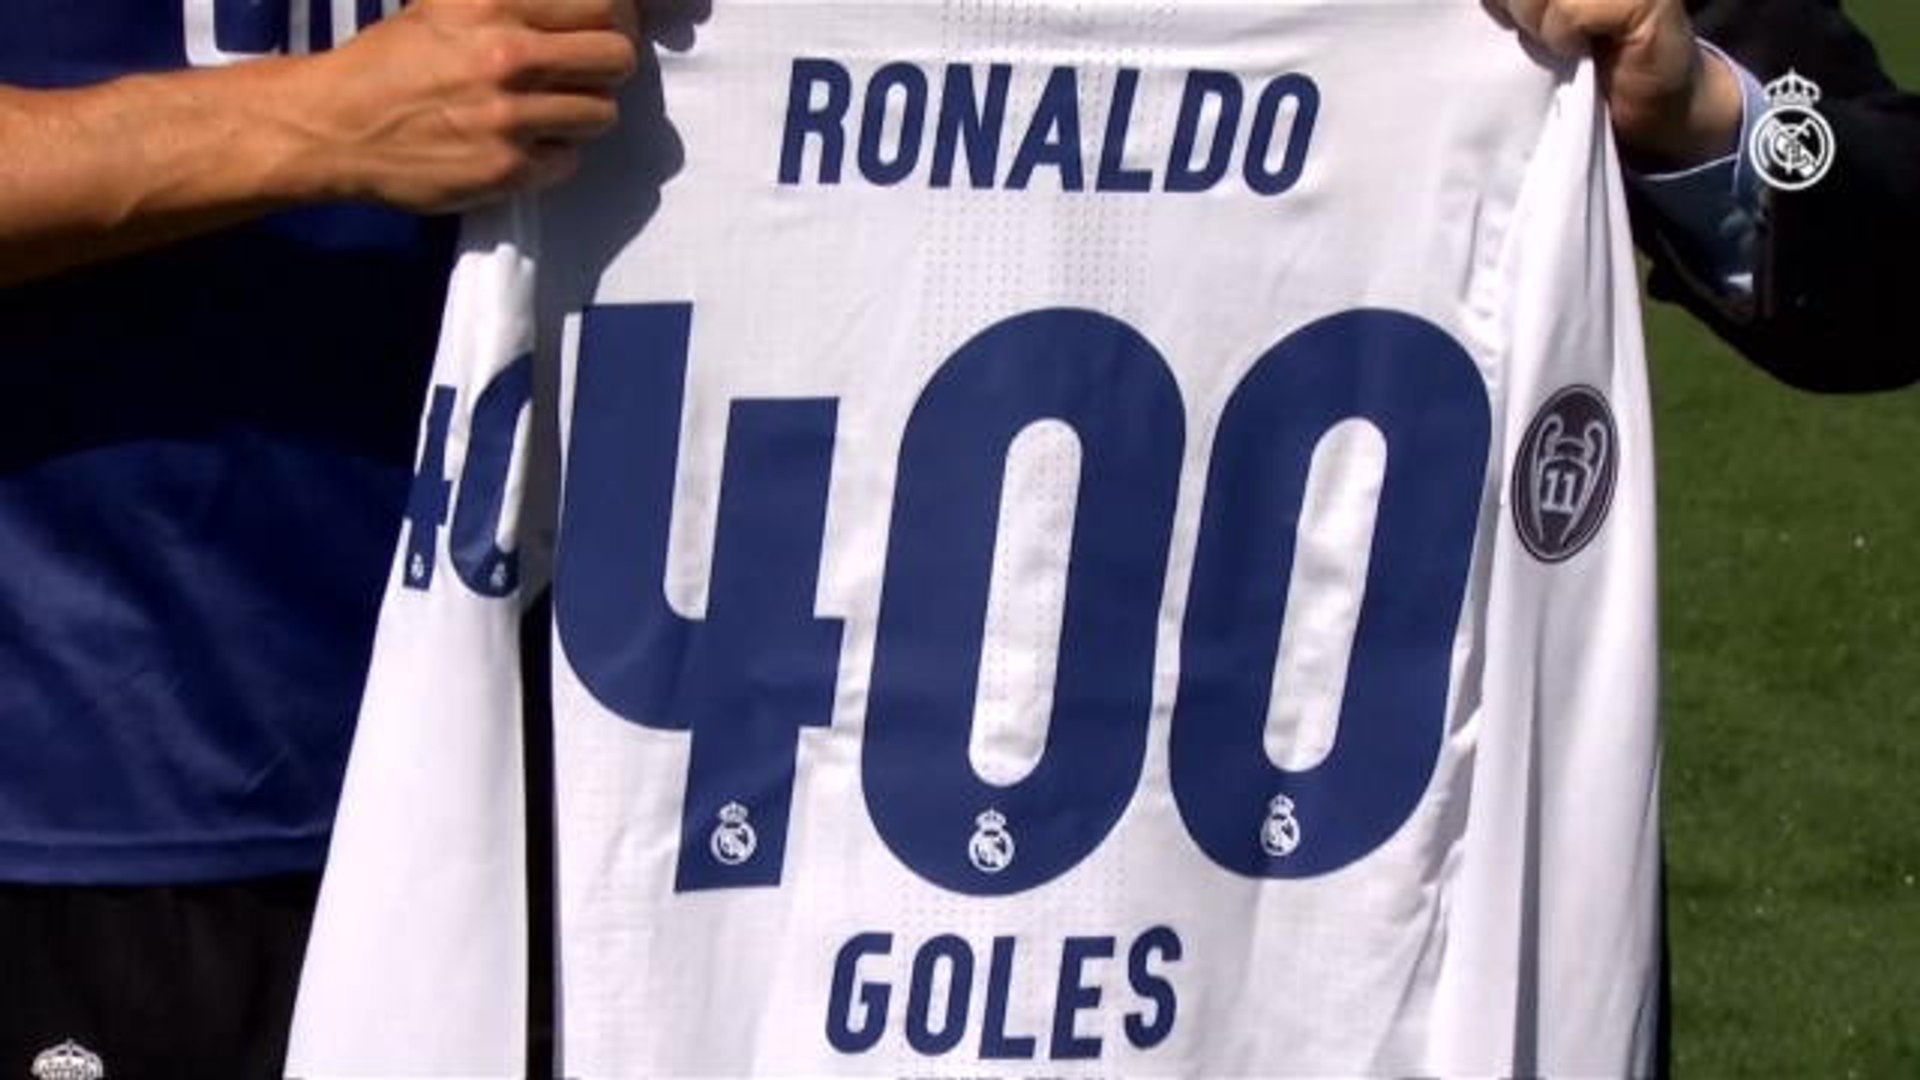 Ronaldo gets 400 goal shirt from Real - video Dailymotion